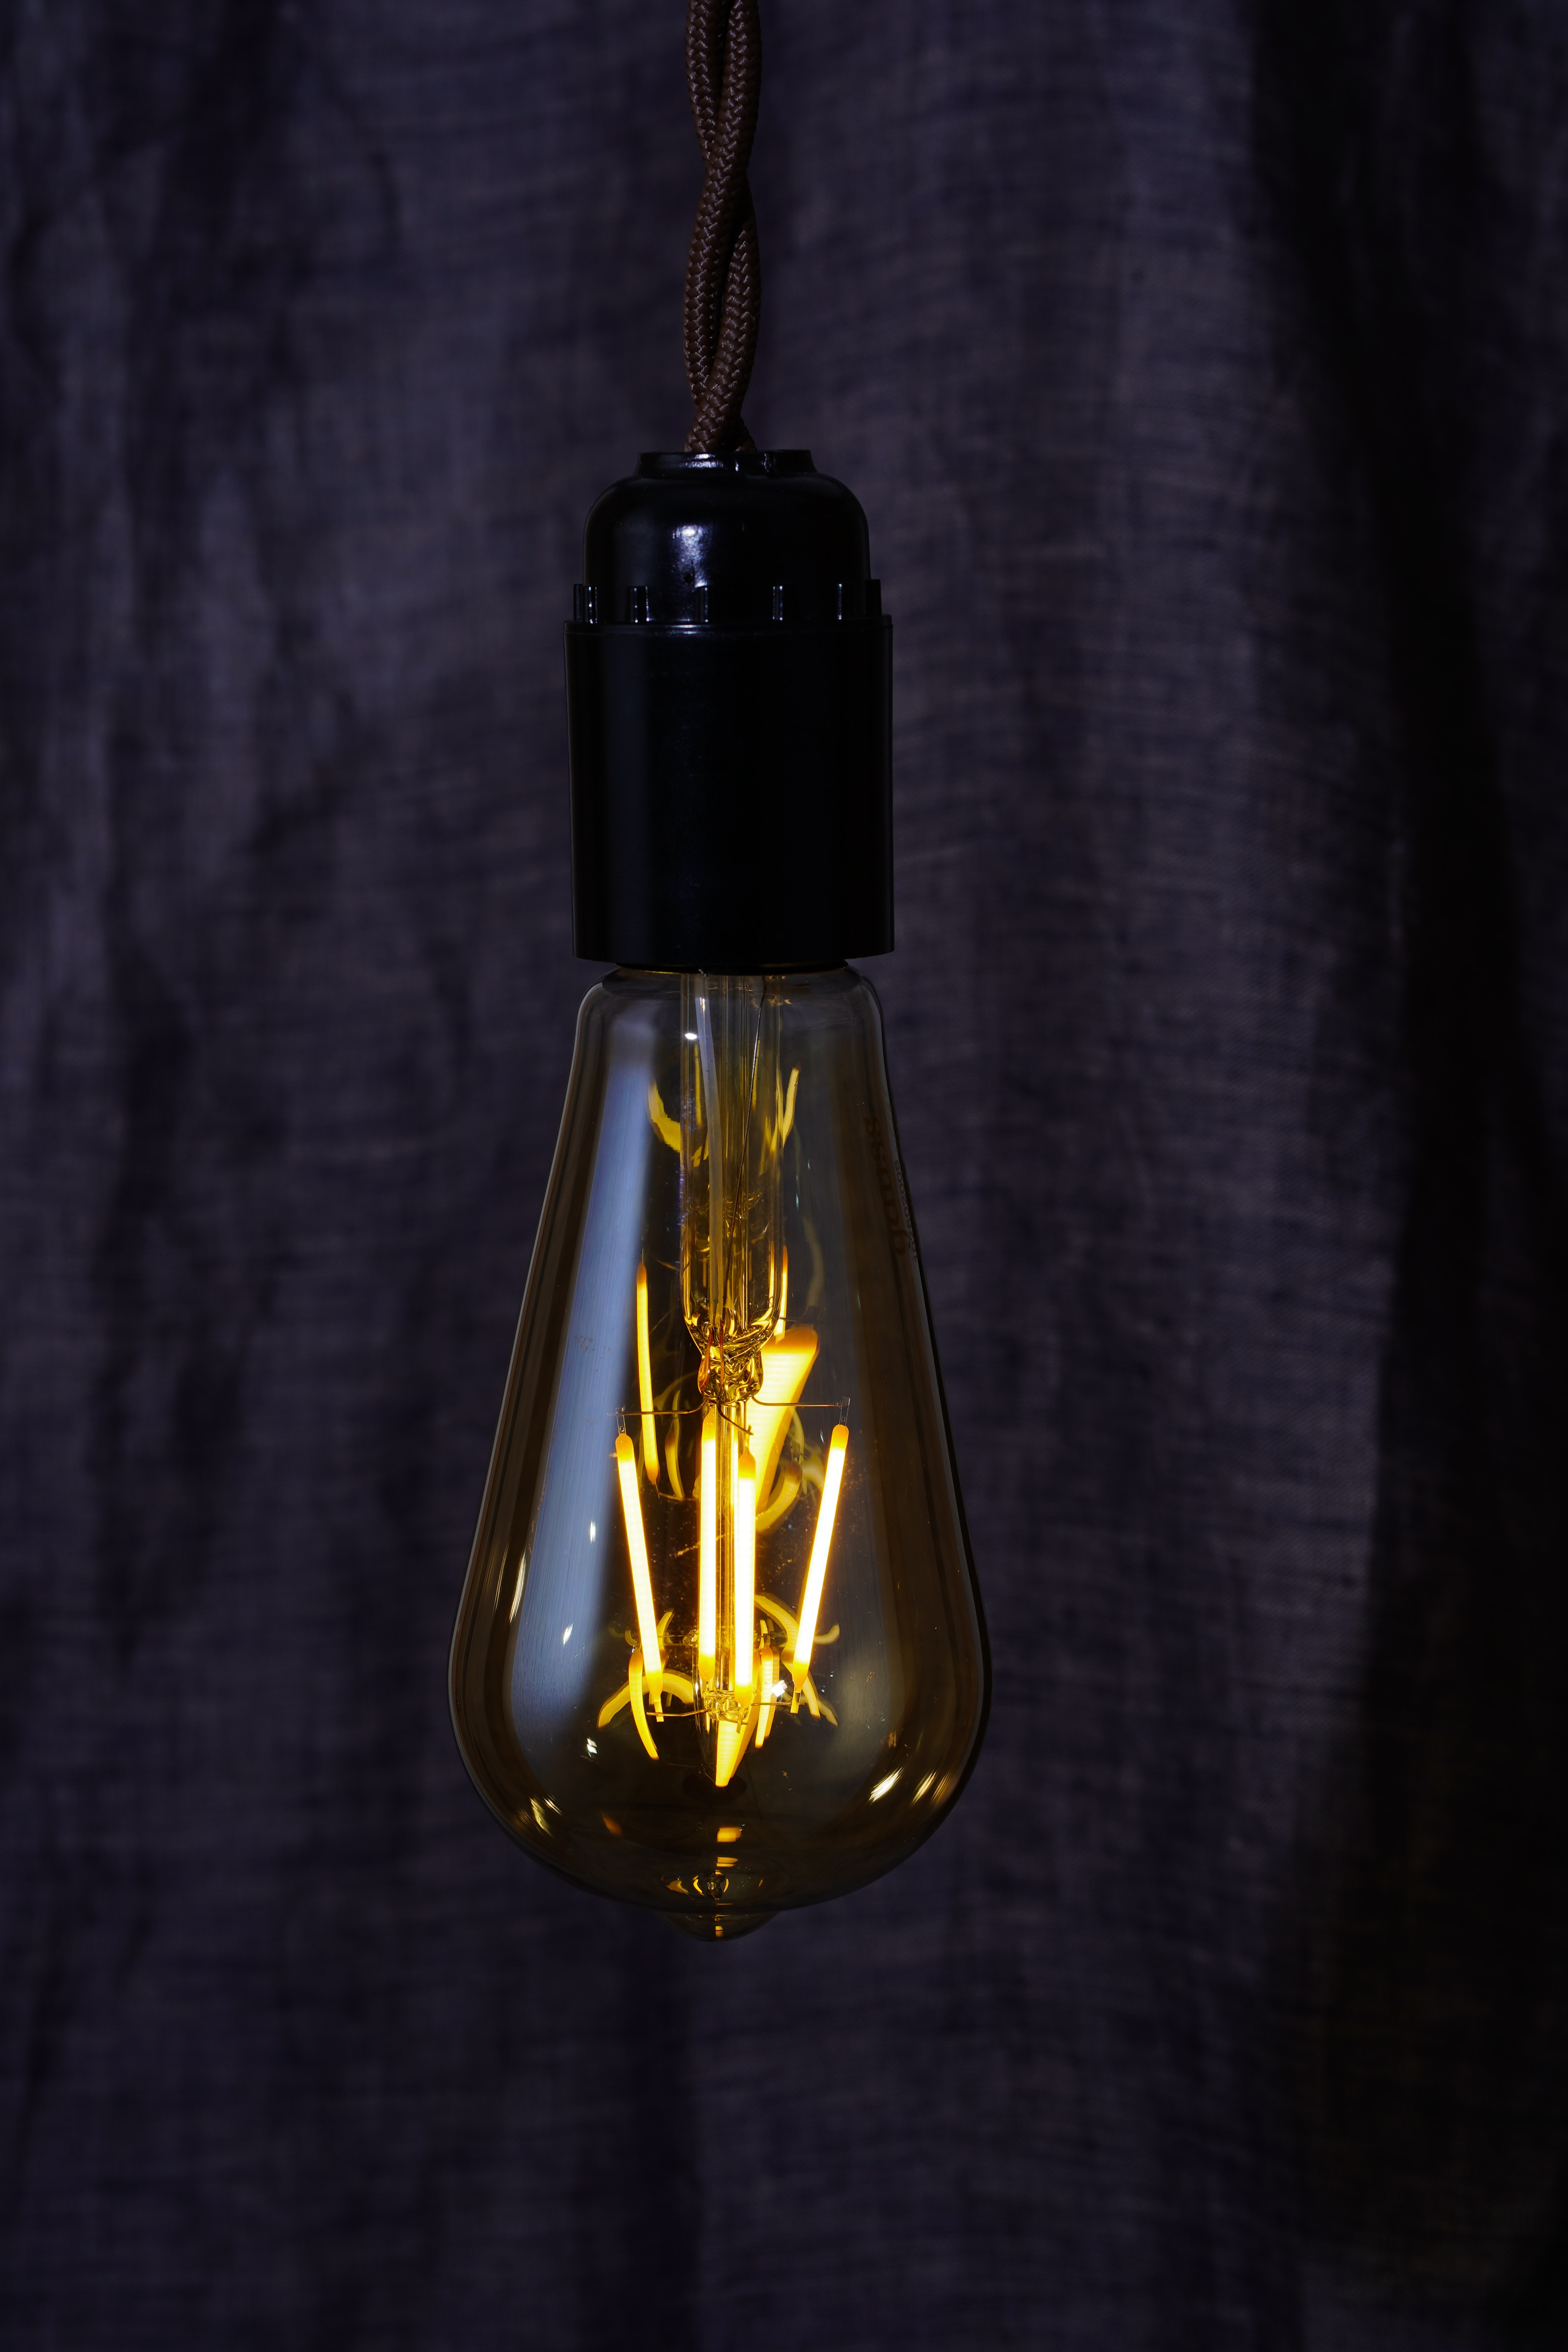 A lightbulb with light-emitting diodes inside